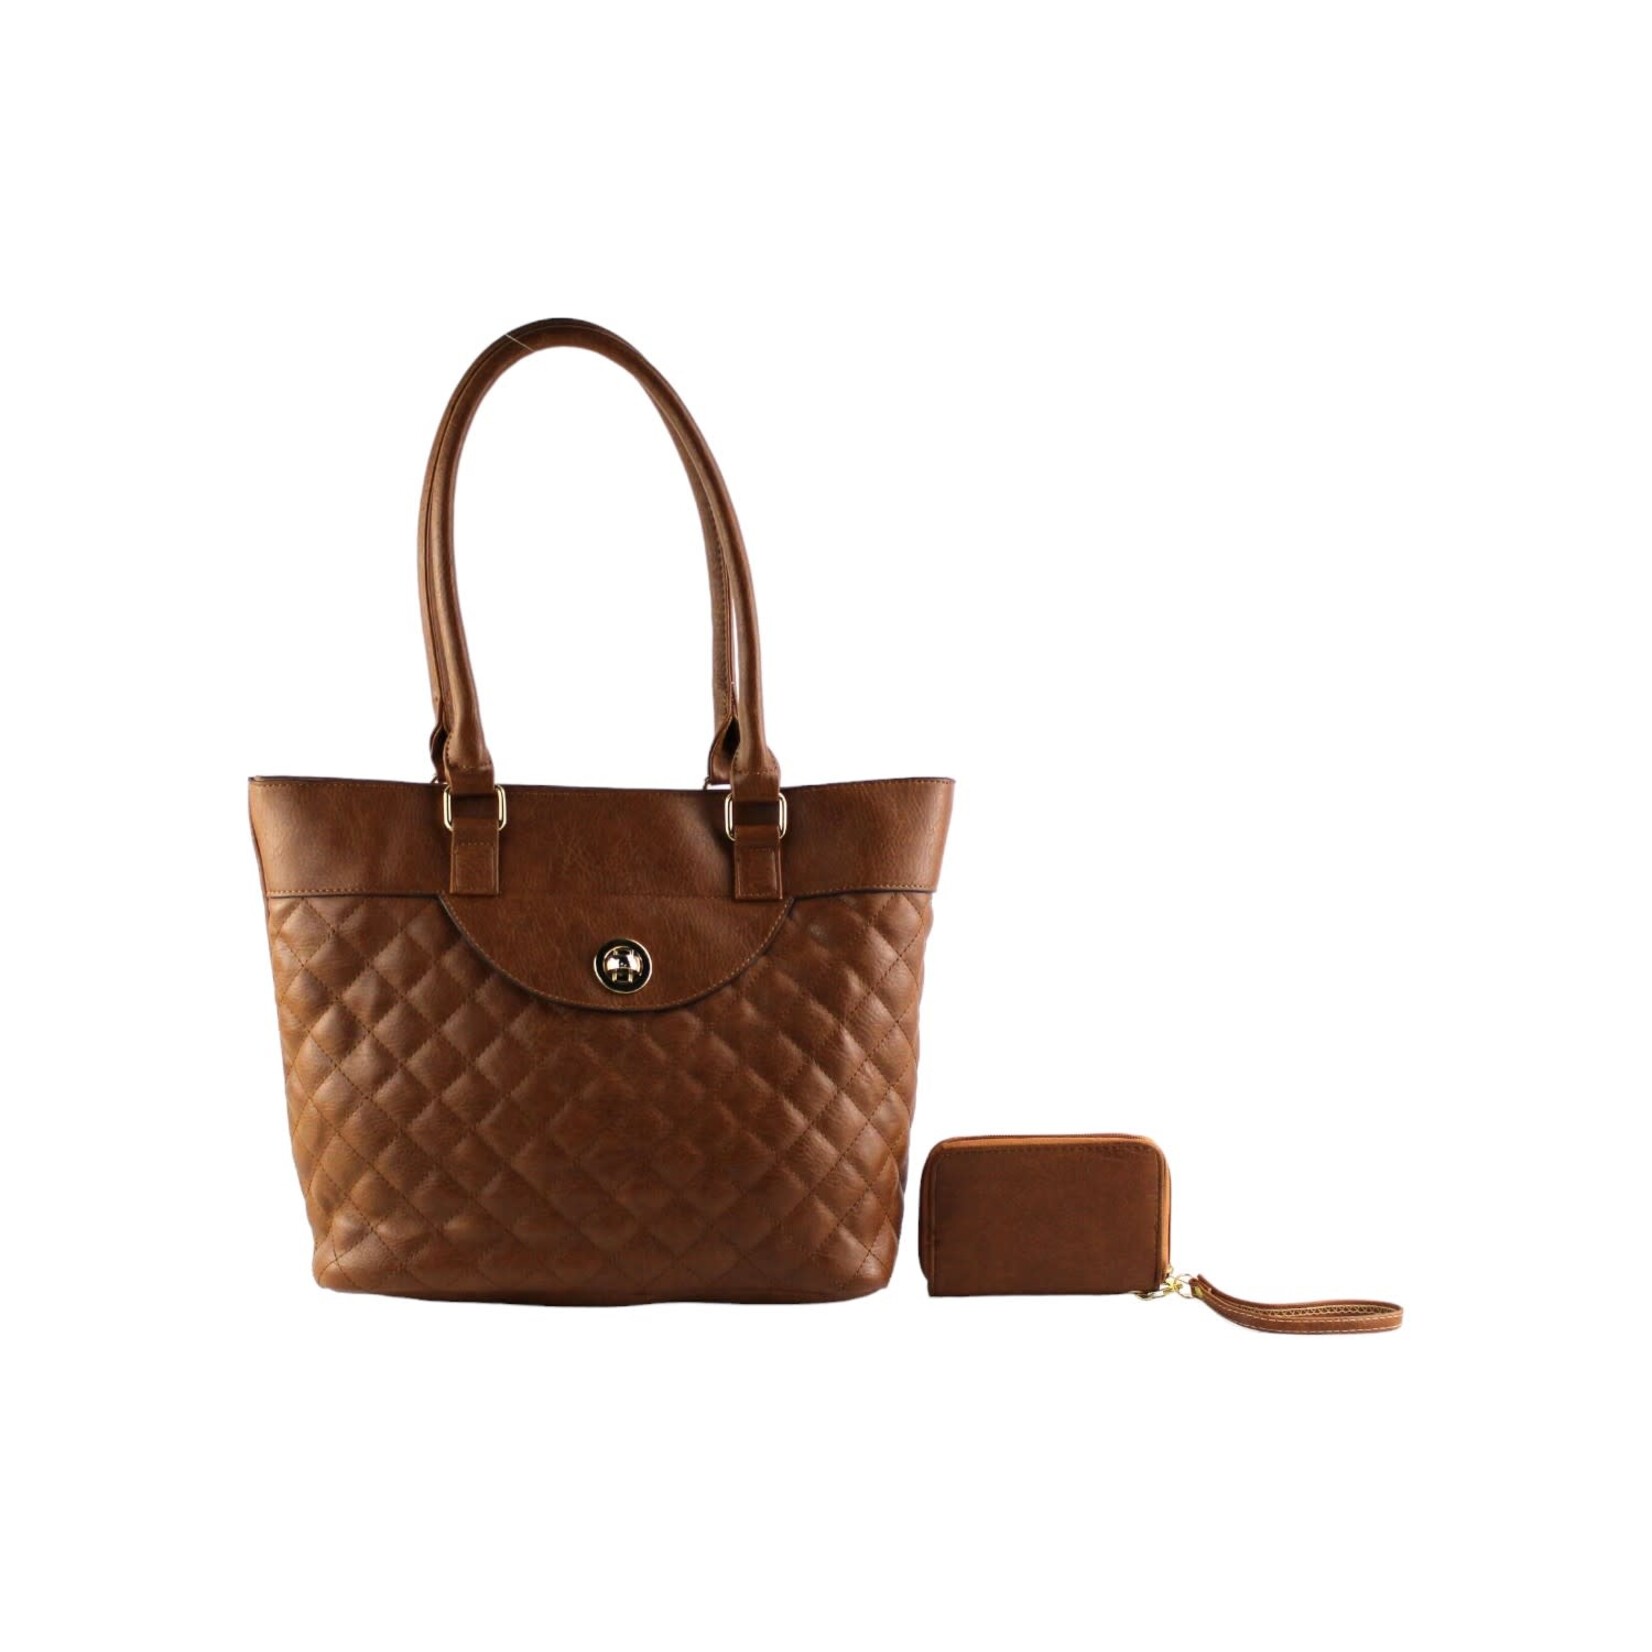 ARNY AR NEW YORK QUILTED TOTE WITH WALLET 7803